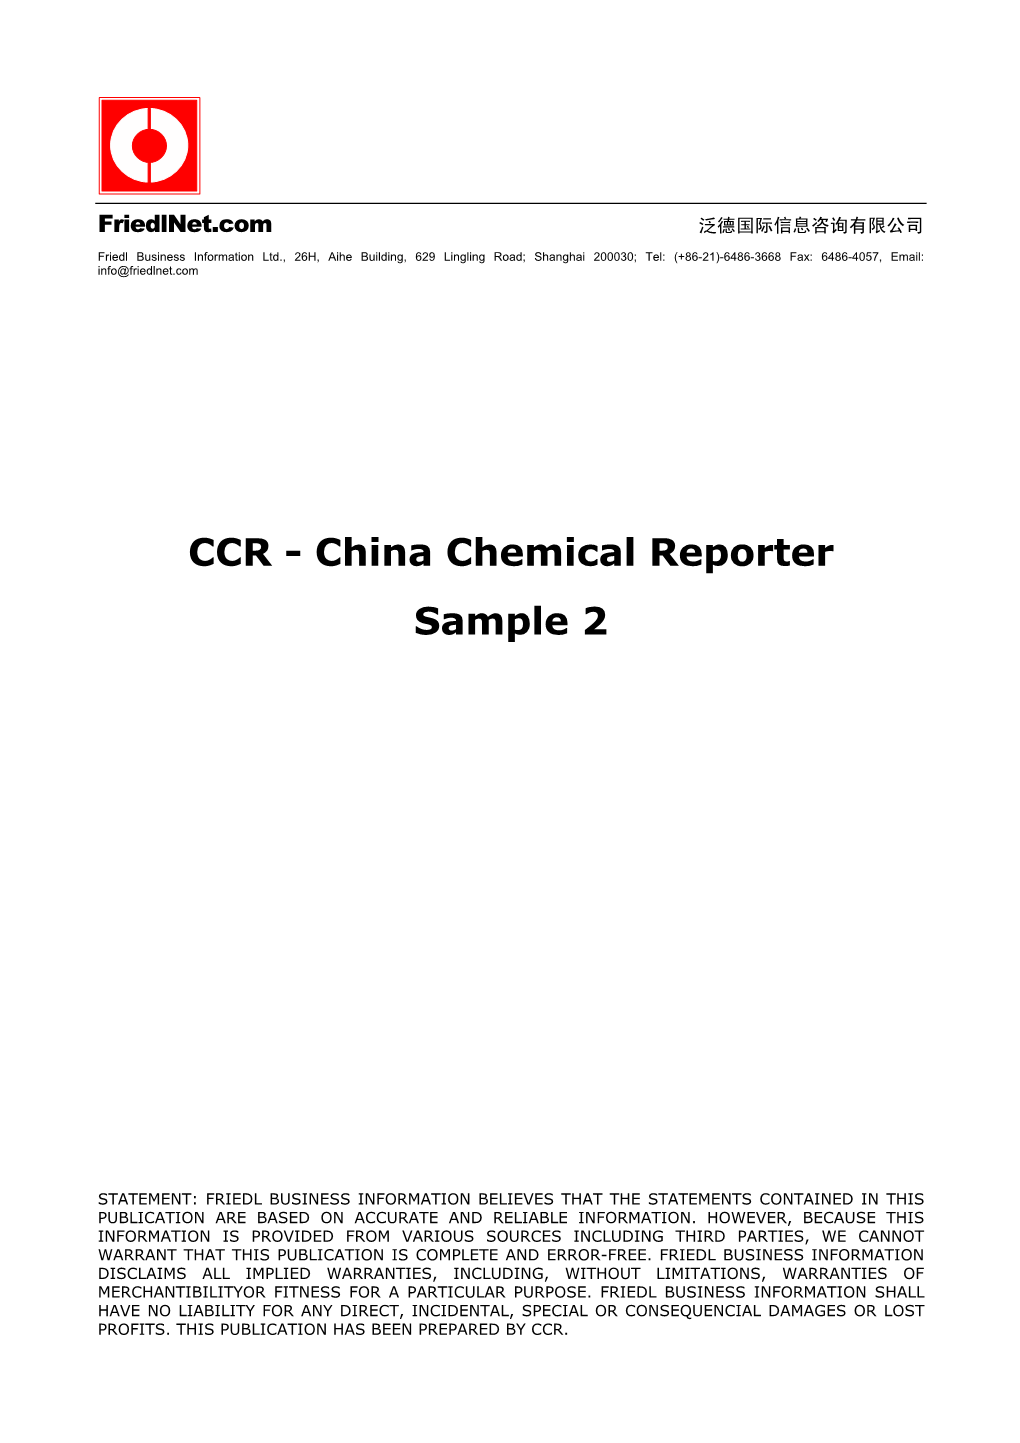 China Chemical Reporter Sample 2